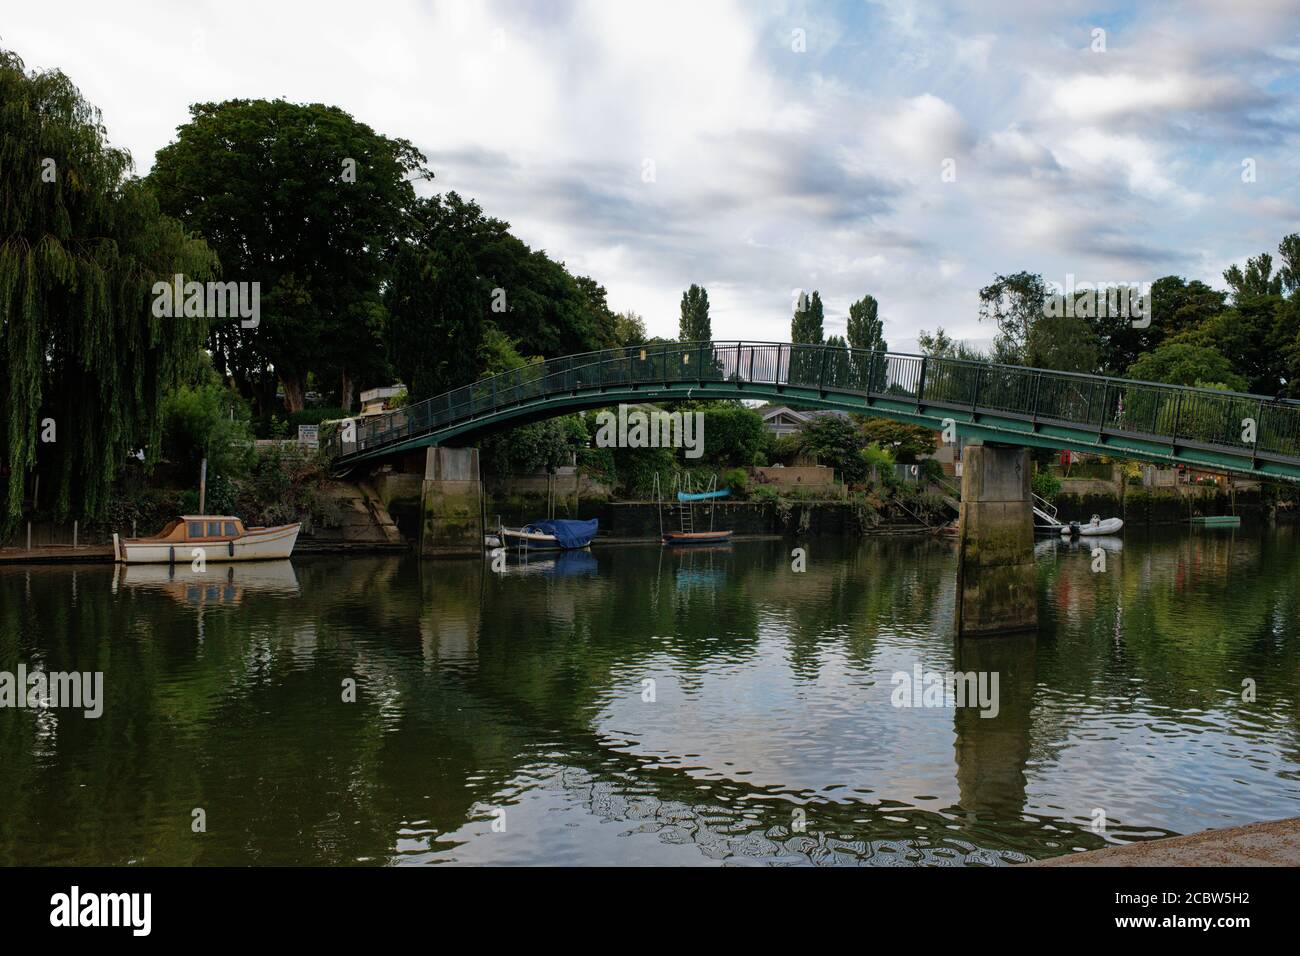 Bridge to Eel Pie Island, an island in the River Thames at Twickenham where bands like The Who and The Rolling Stone s played their early gigs Stock Photo